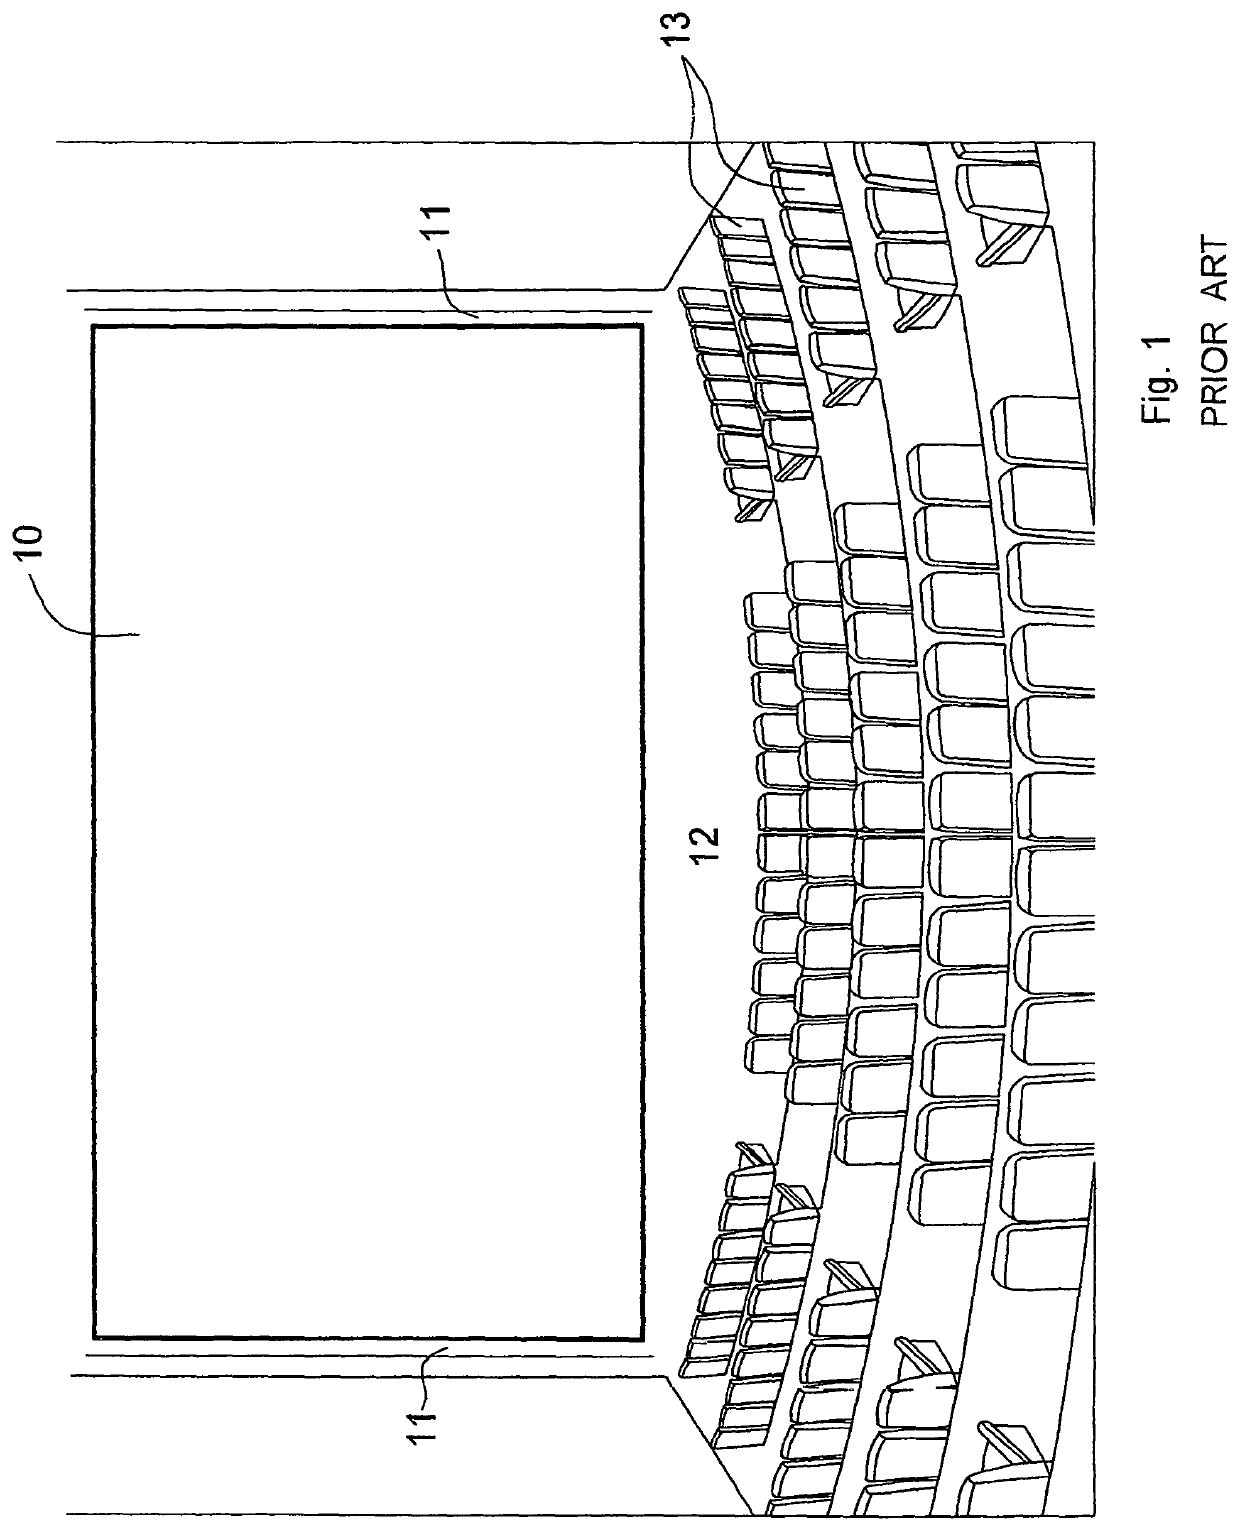 Method and system for creating wide-screen picture-dominance effect in a conventional motion-picture theater